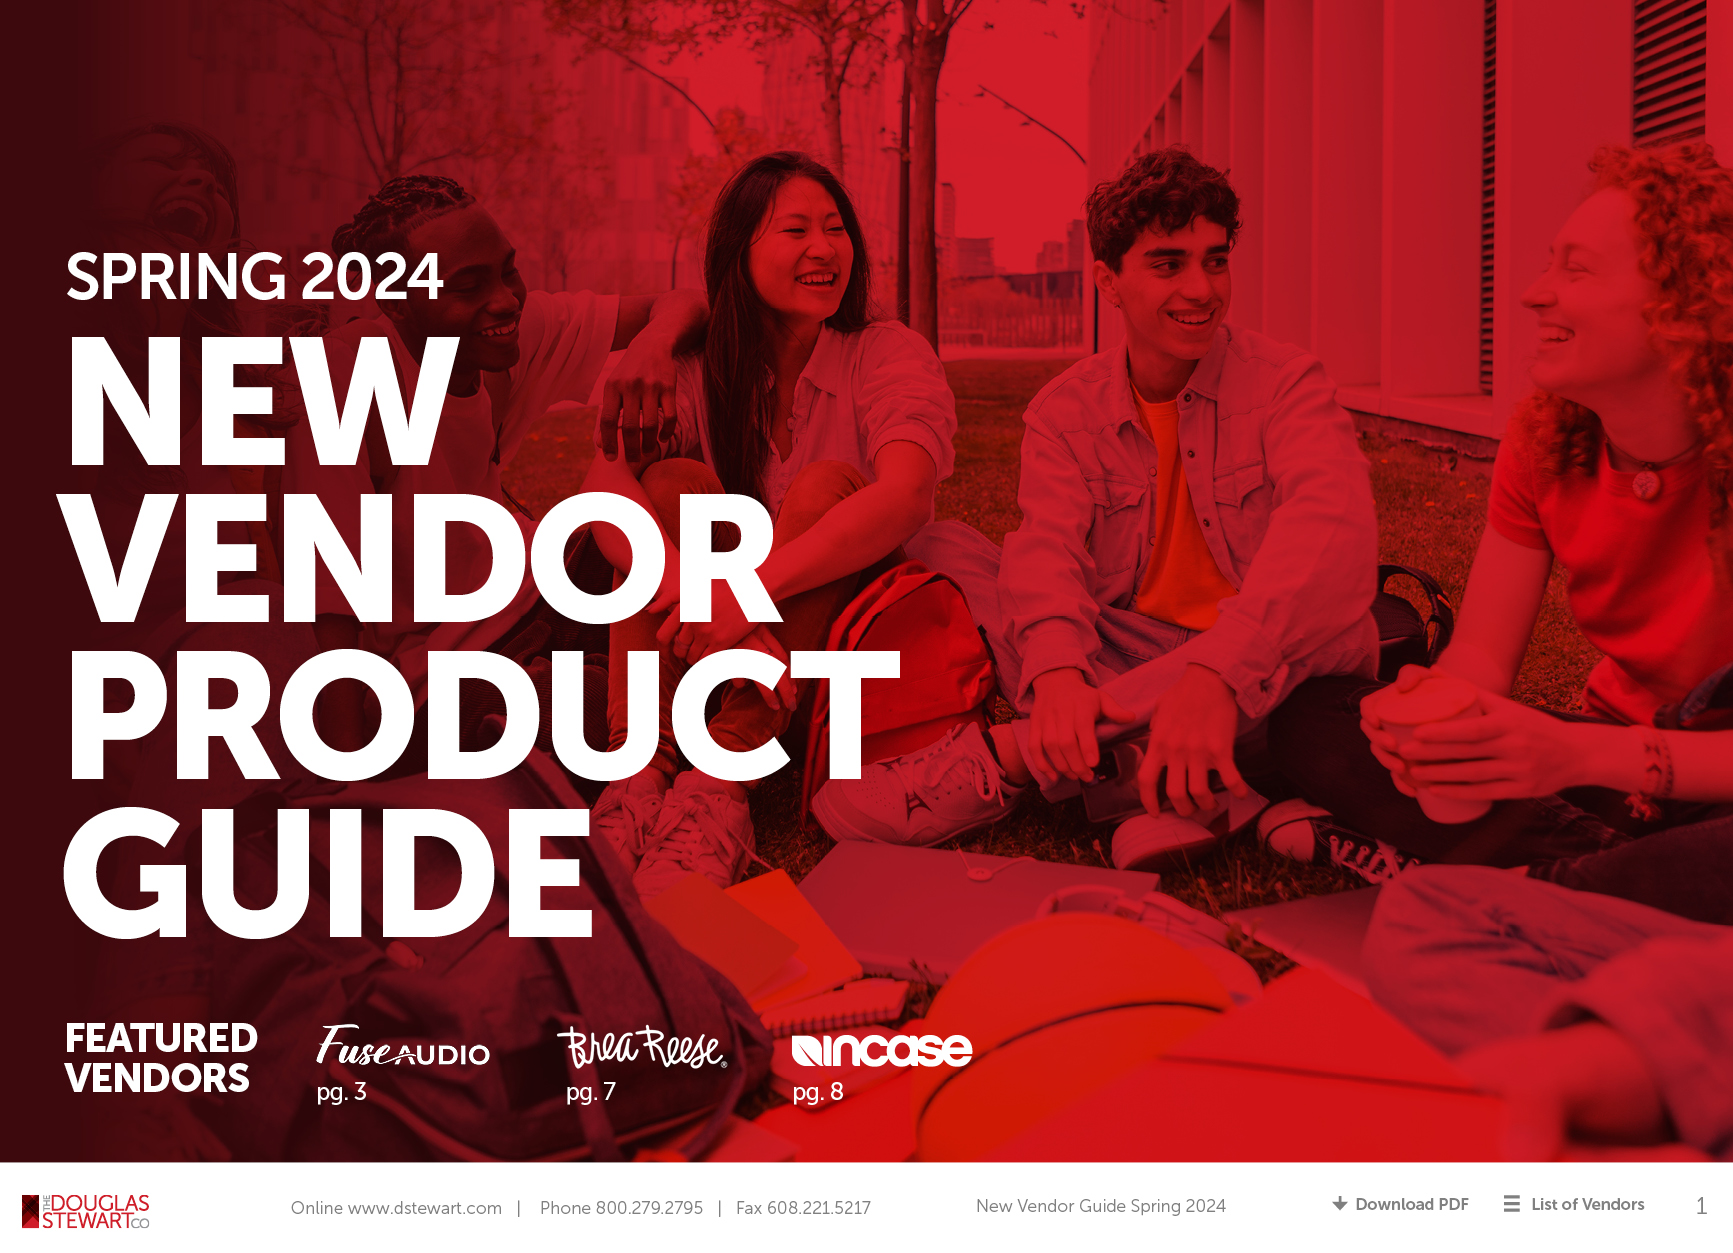 New Vendor Product Guide Spring 2024